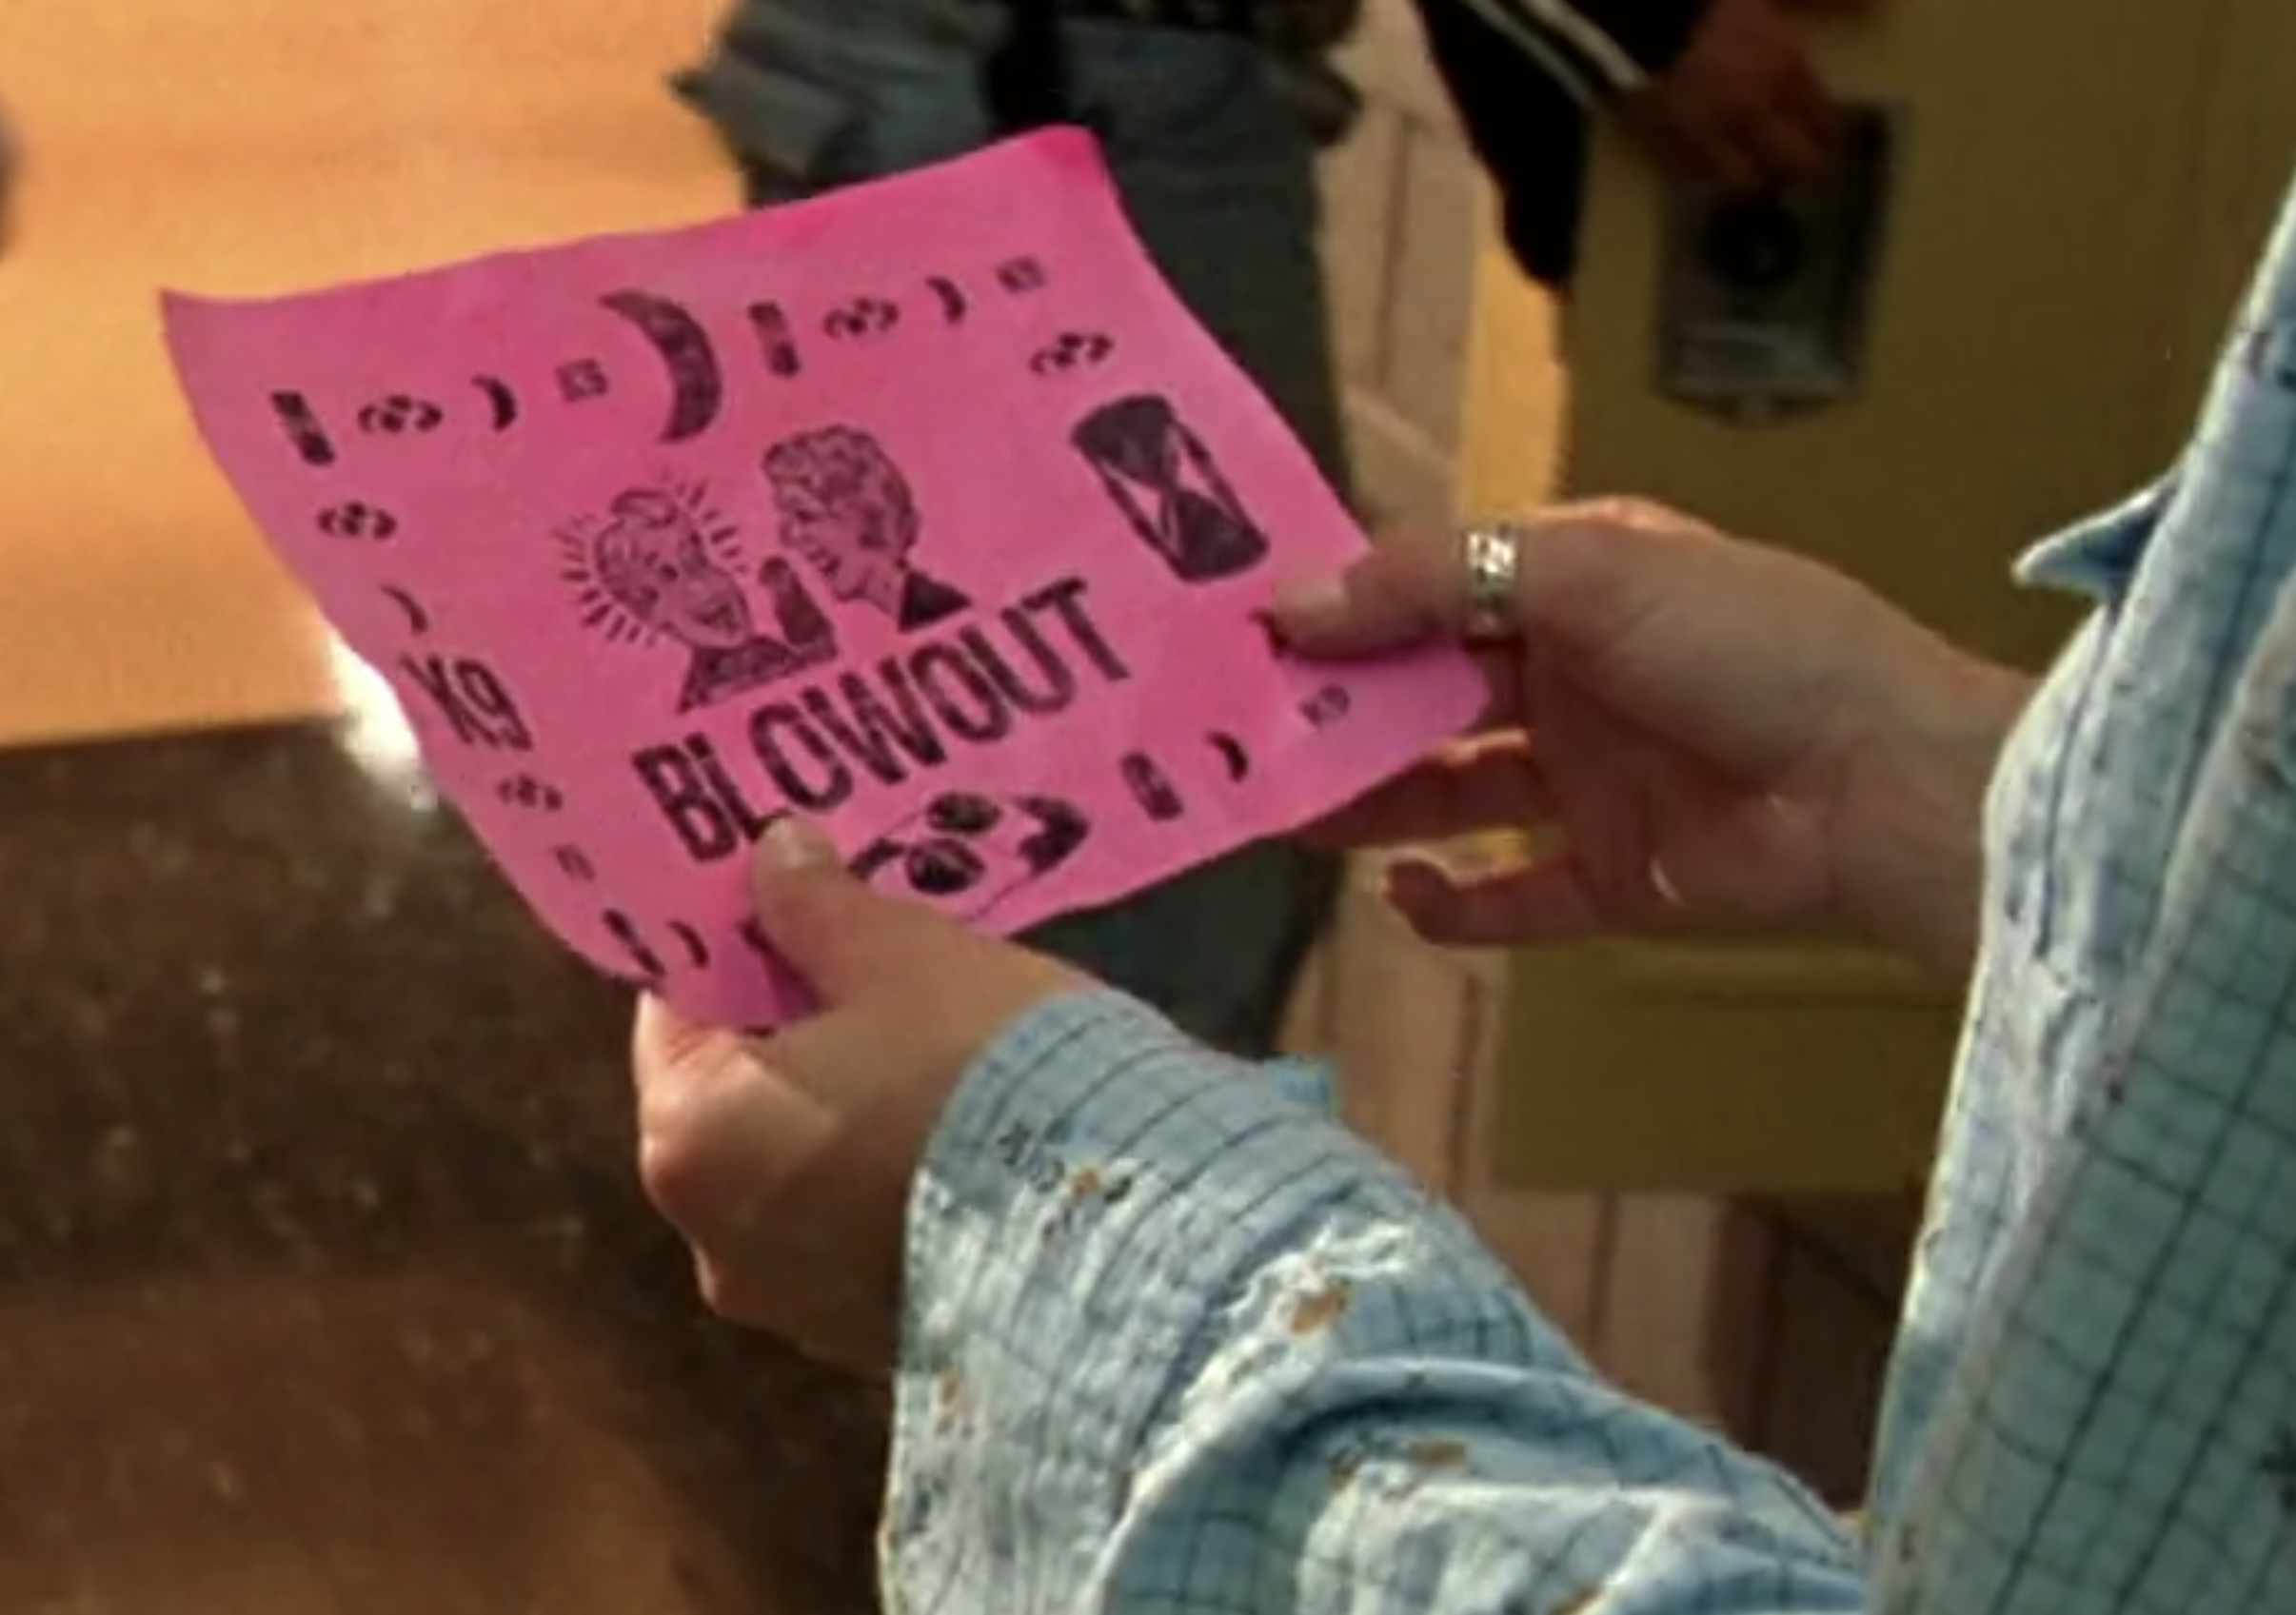 A screenshot from Veronica Mars. Veronica holds a pink piece of paper that reads BLOWOUT and is surrounded by symbols: crescent moons, eggs, "K9"